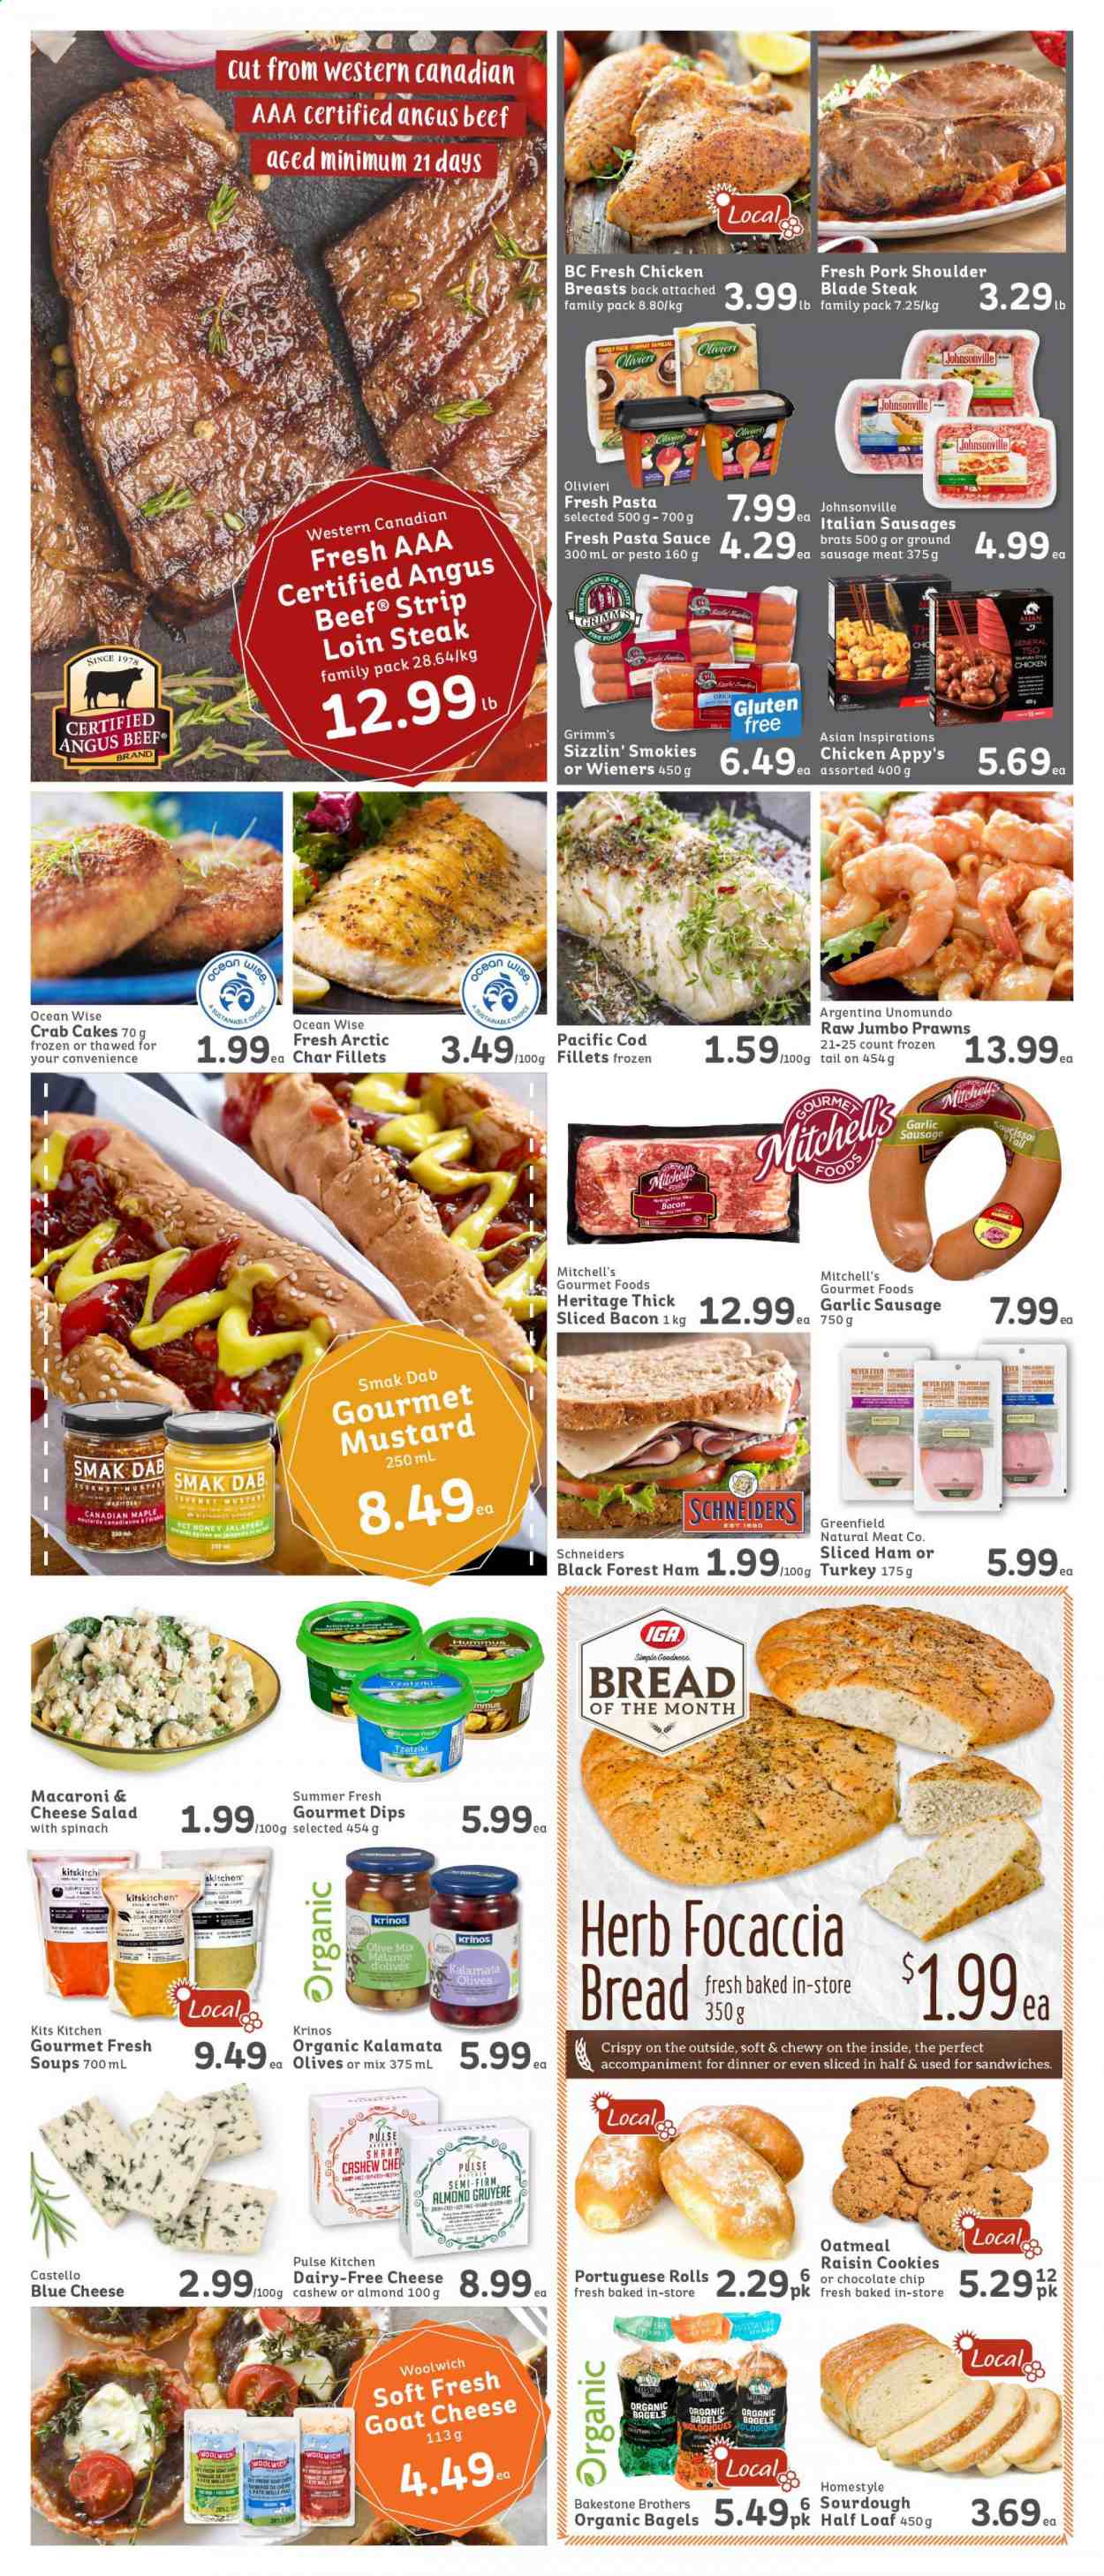 thumbnail - IGA Simple Goodness Flyer - January 29, 2021 - February 04, 2021 - Sales products - bagels, bread, focaccia, garlic, salad, jalapeño, coconut, cod, prawns, crab cake, macaroni & cheese, pasta sauce, sandwich, soup, sauce, bacon, ham, Johnsonville, sausage, tzatziki, blue cheese, goat cheese, Gruyere, cookies, oatmeal, herbs, mustard, honey, BROTHERS, chicken breasts, beef meat, sausage meat, pork meat, pork shoulder, olives, steak. Page 2.